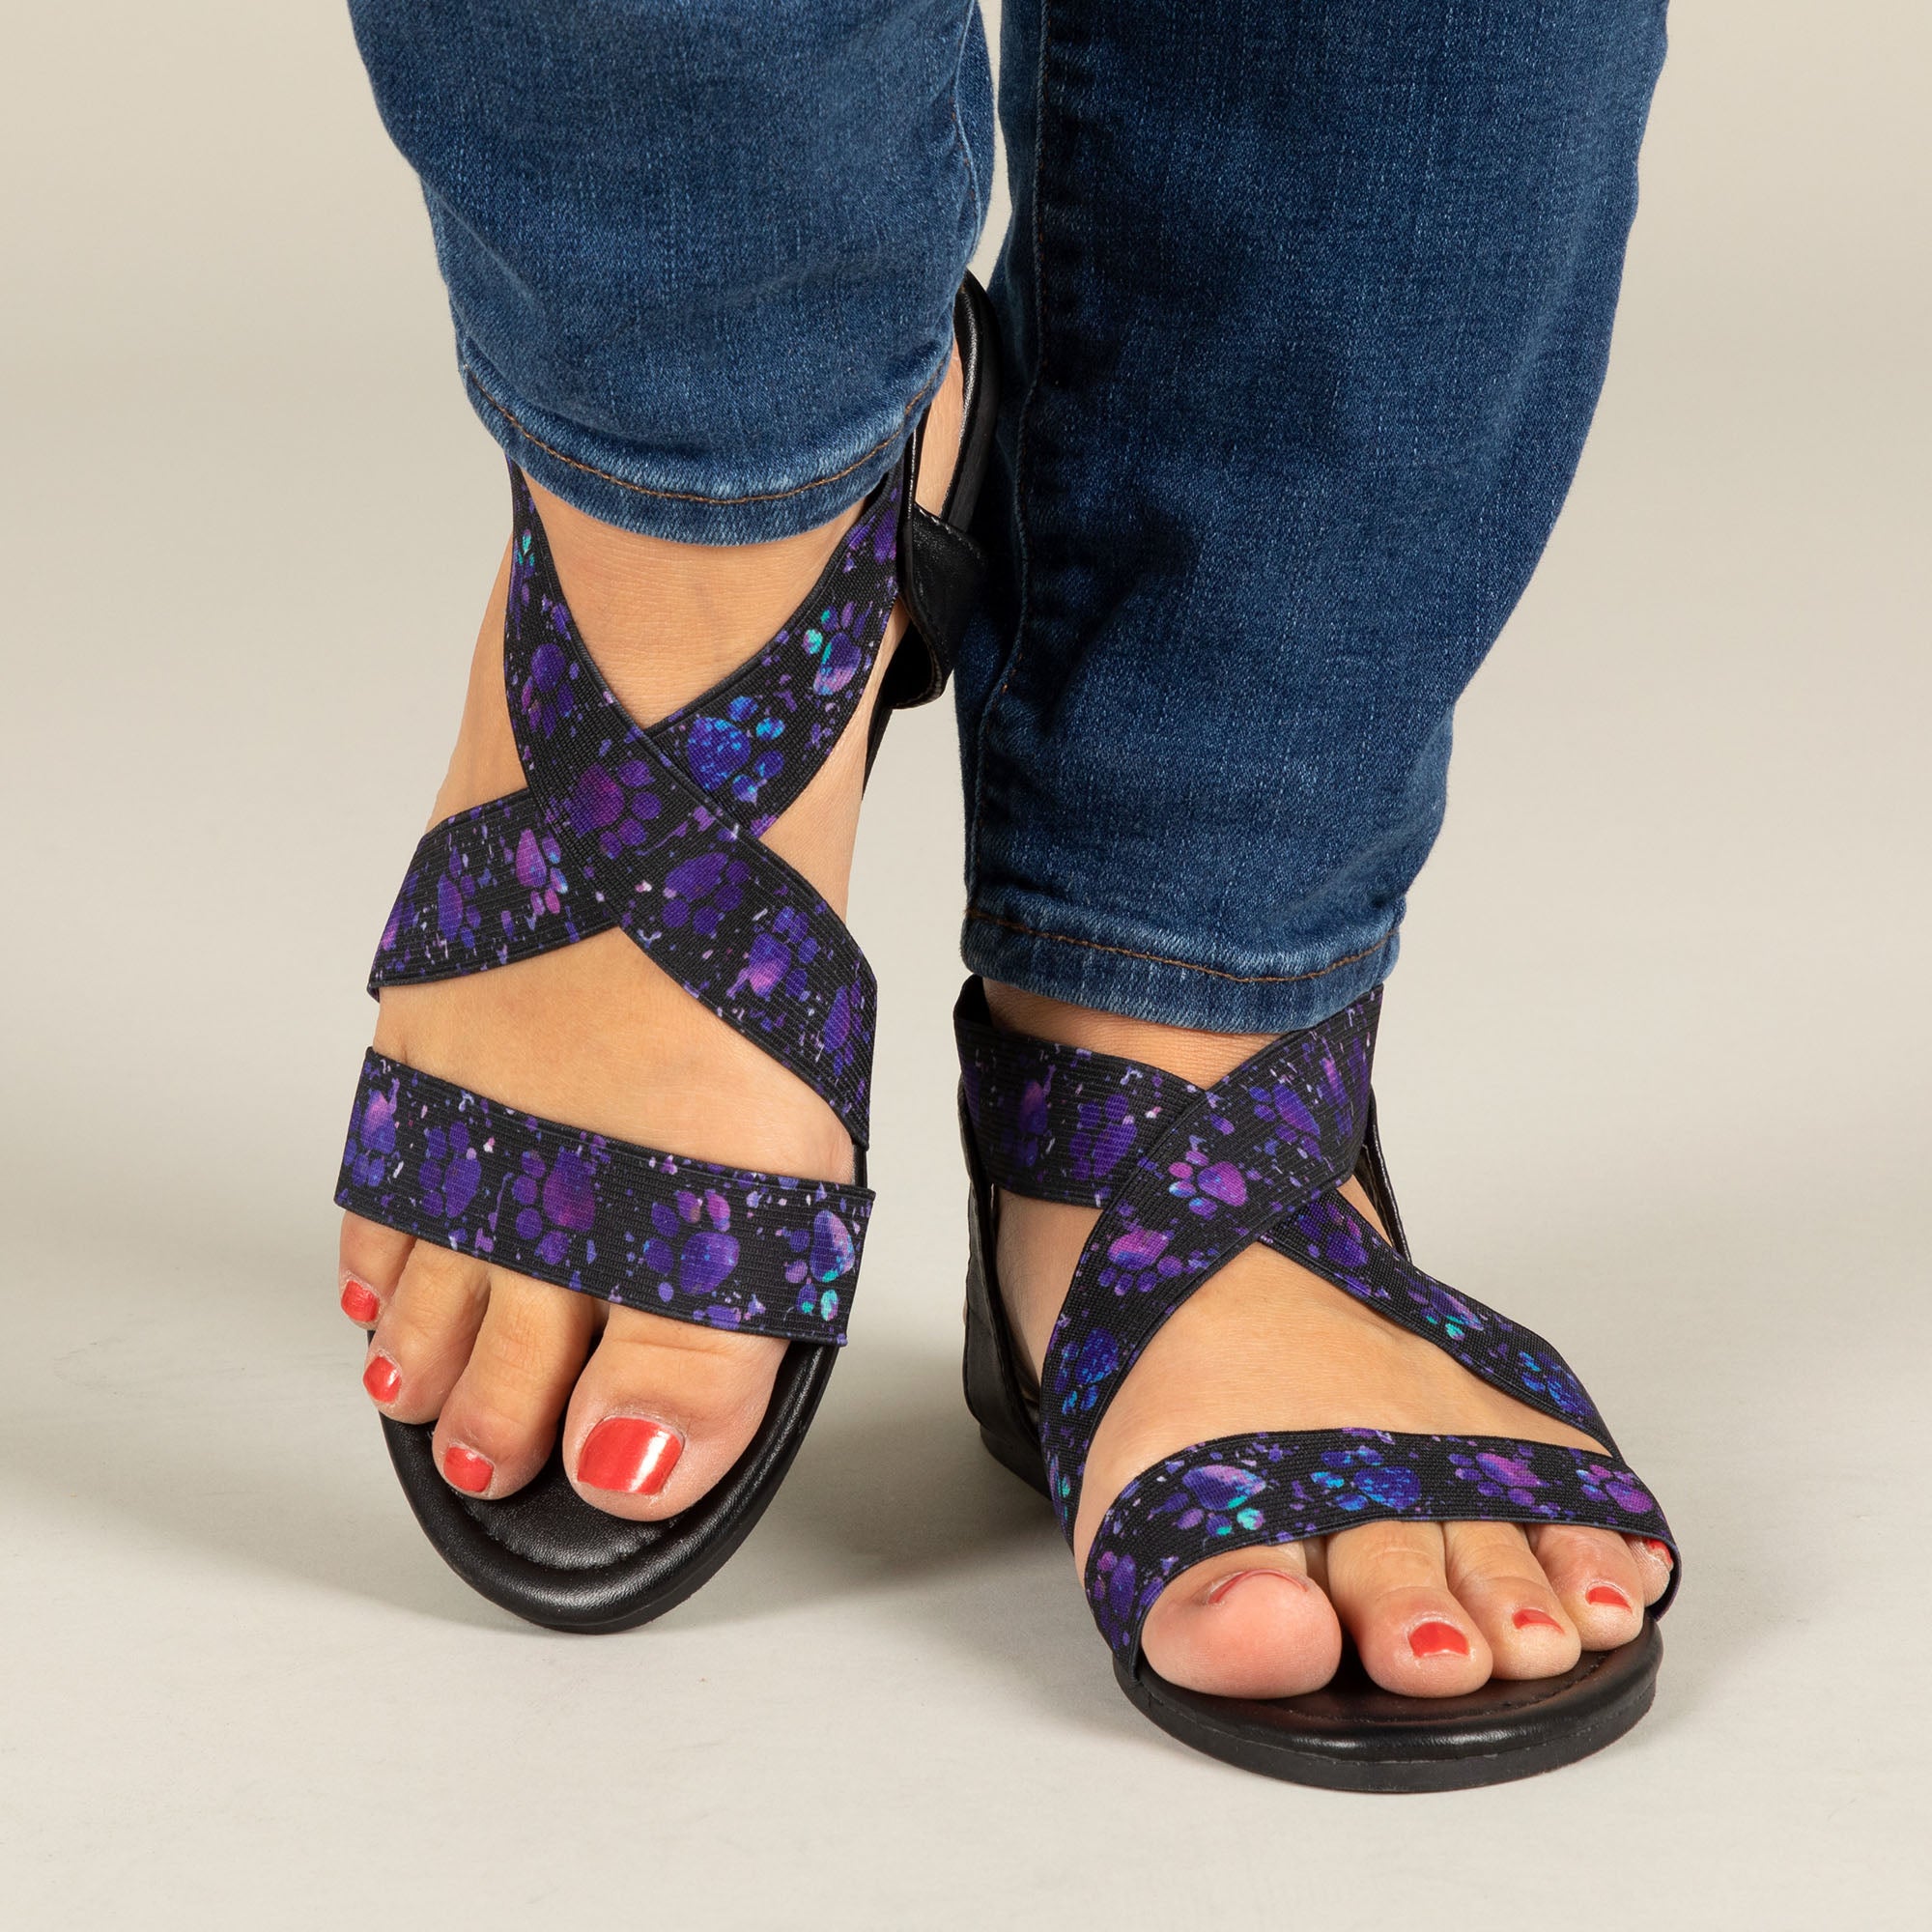 Pawsitively Stretchy Sandals - Painted Paws - 7